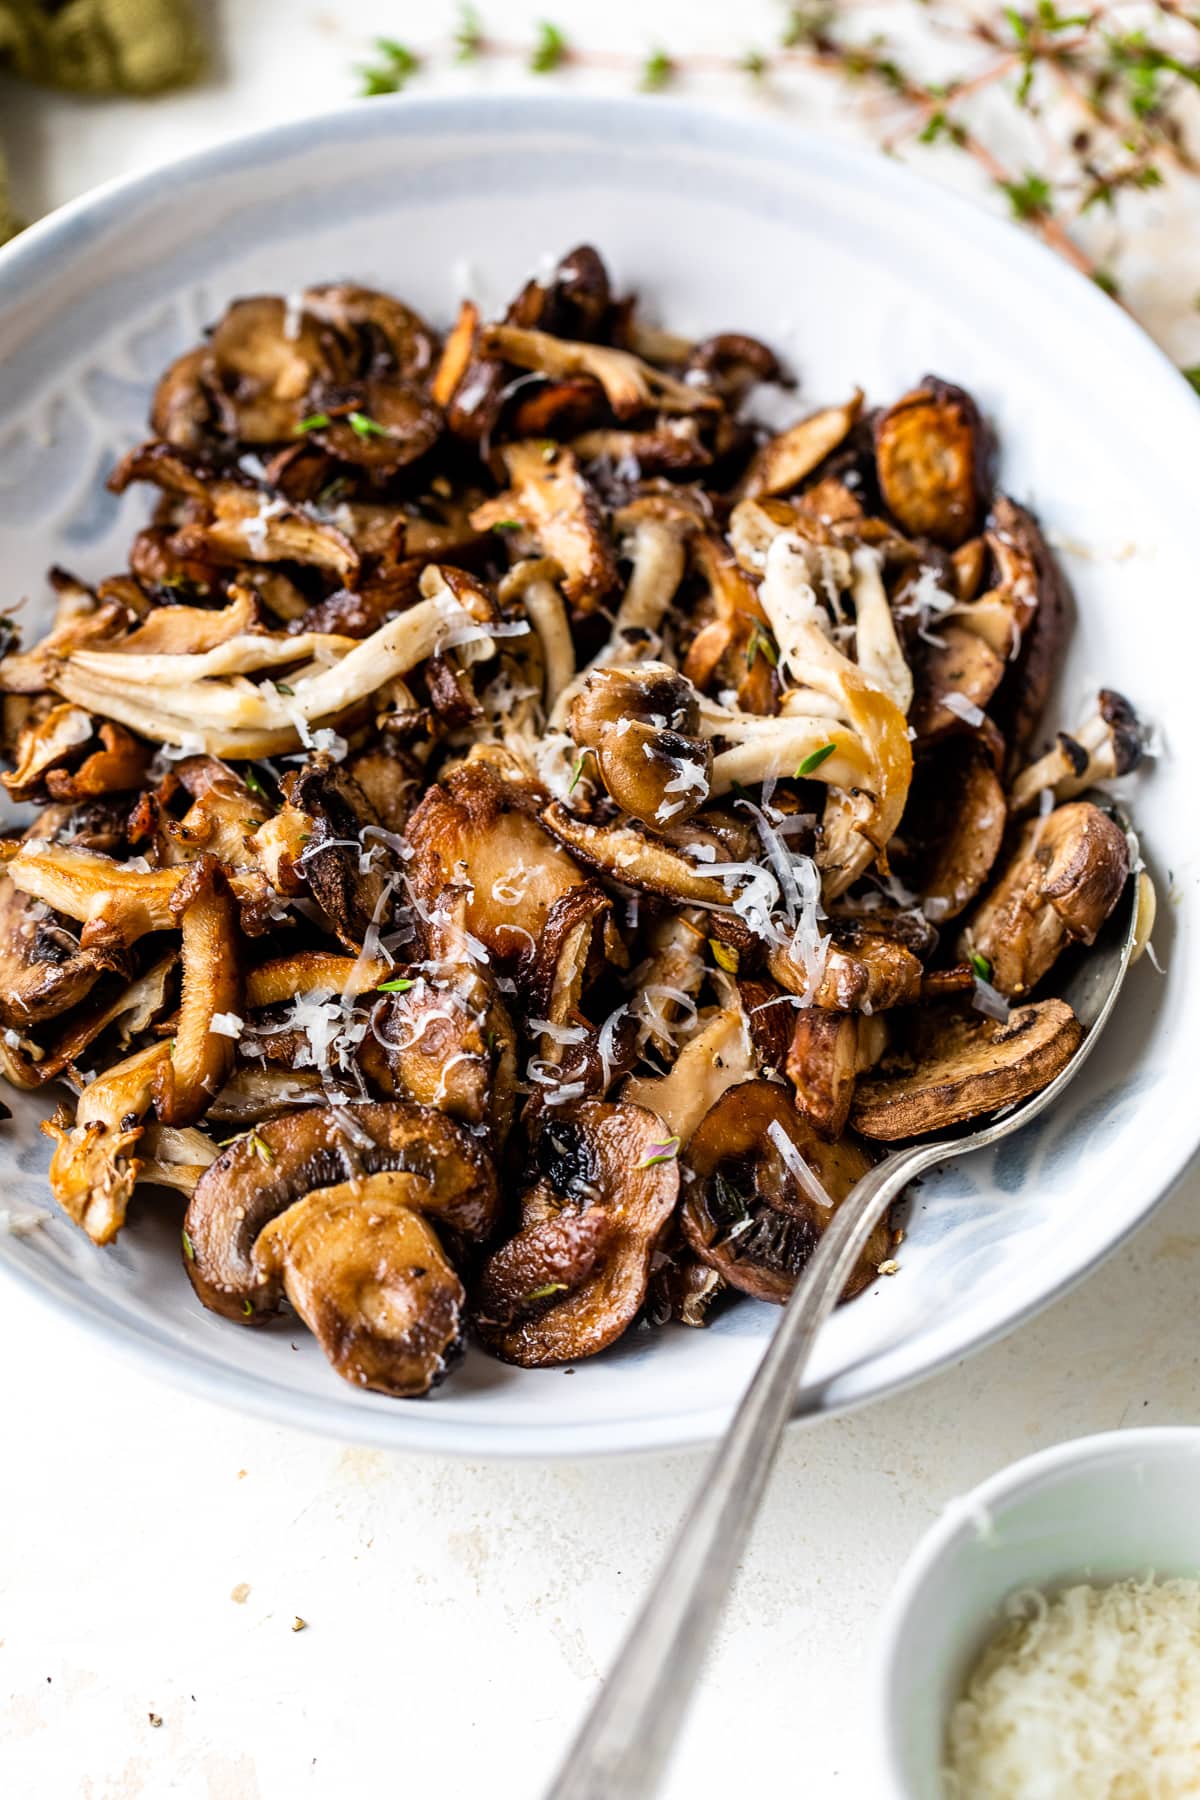 Fried mushrooms with parmesan and balsamic vinegar